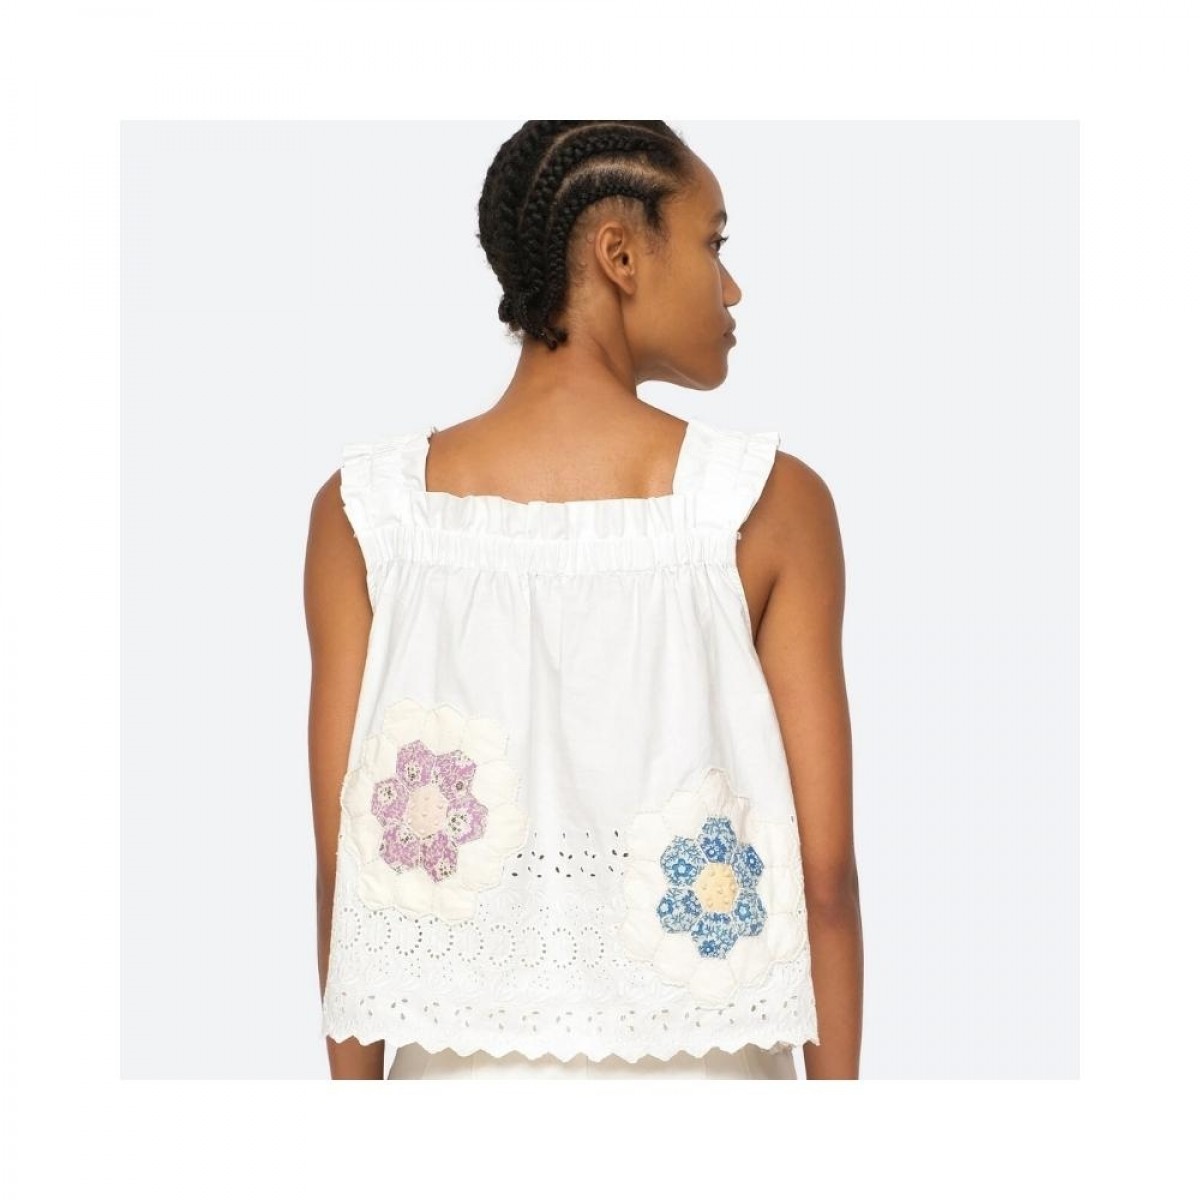 violette patch top - white - bagfra